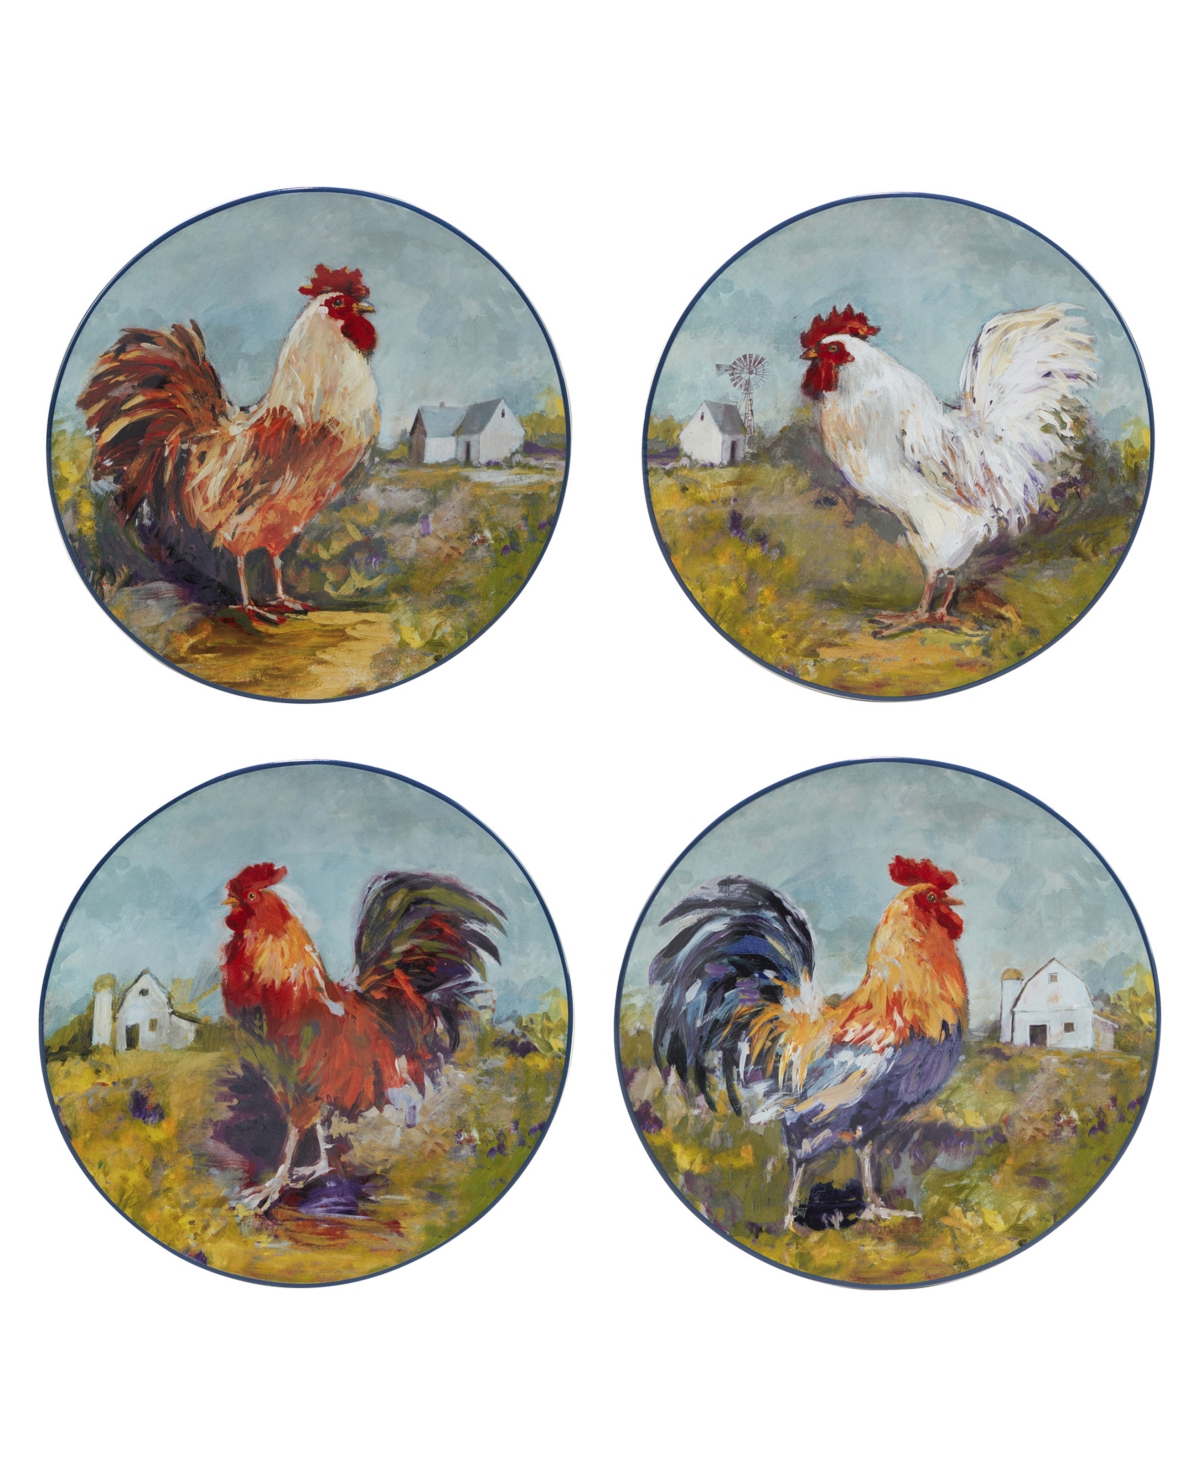 Rooster Meadow Dinner Plate, Set of 4 - Blue